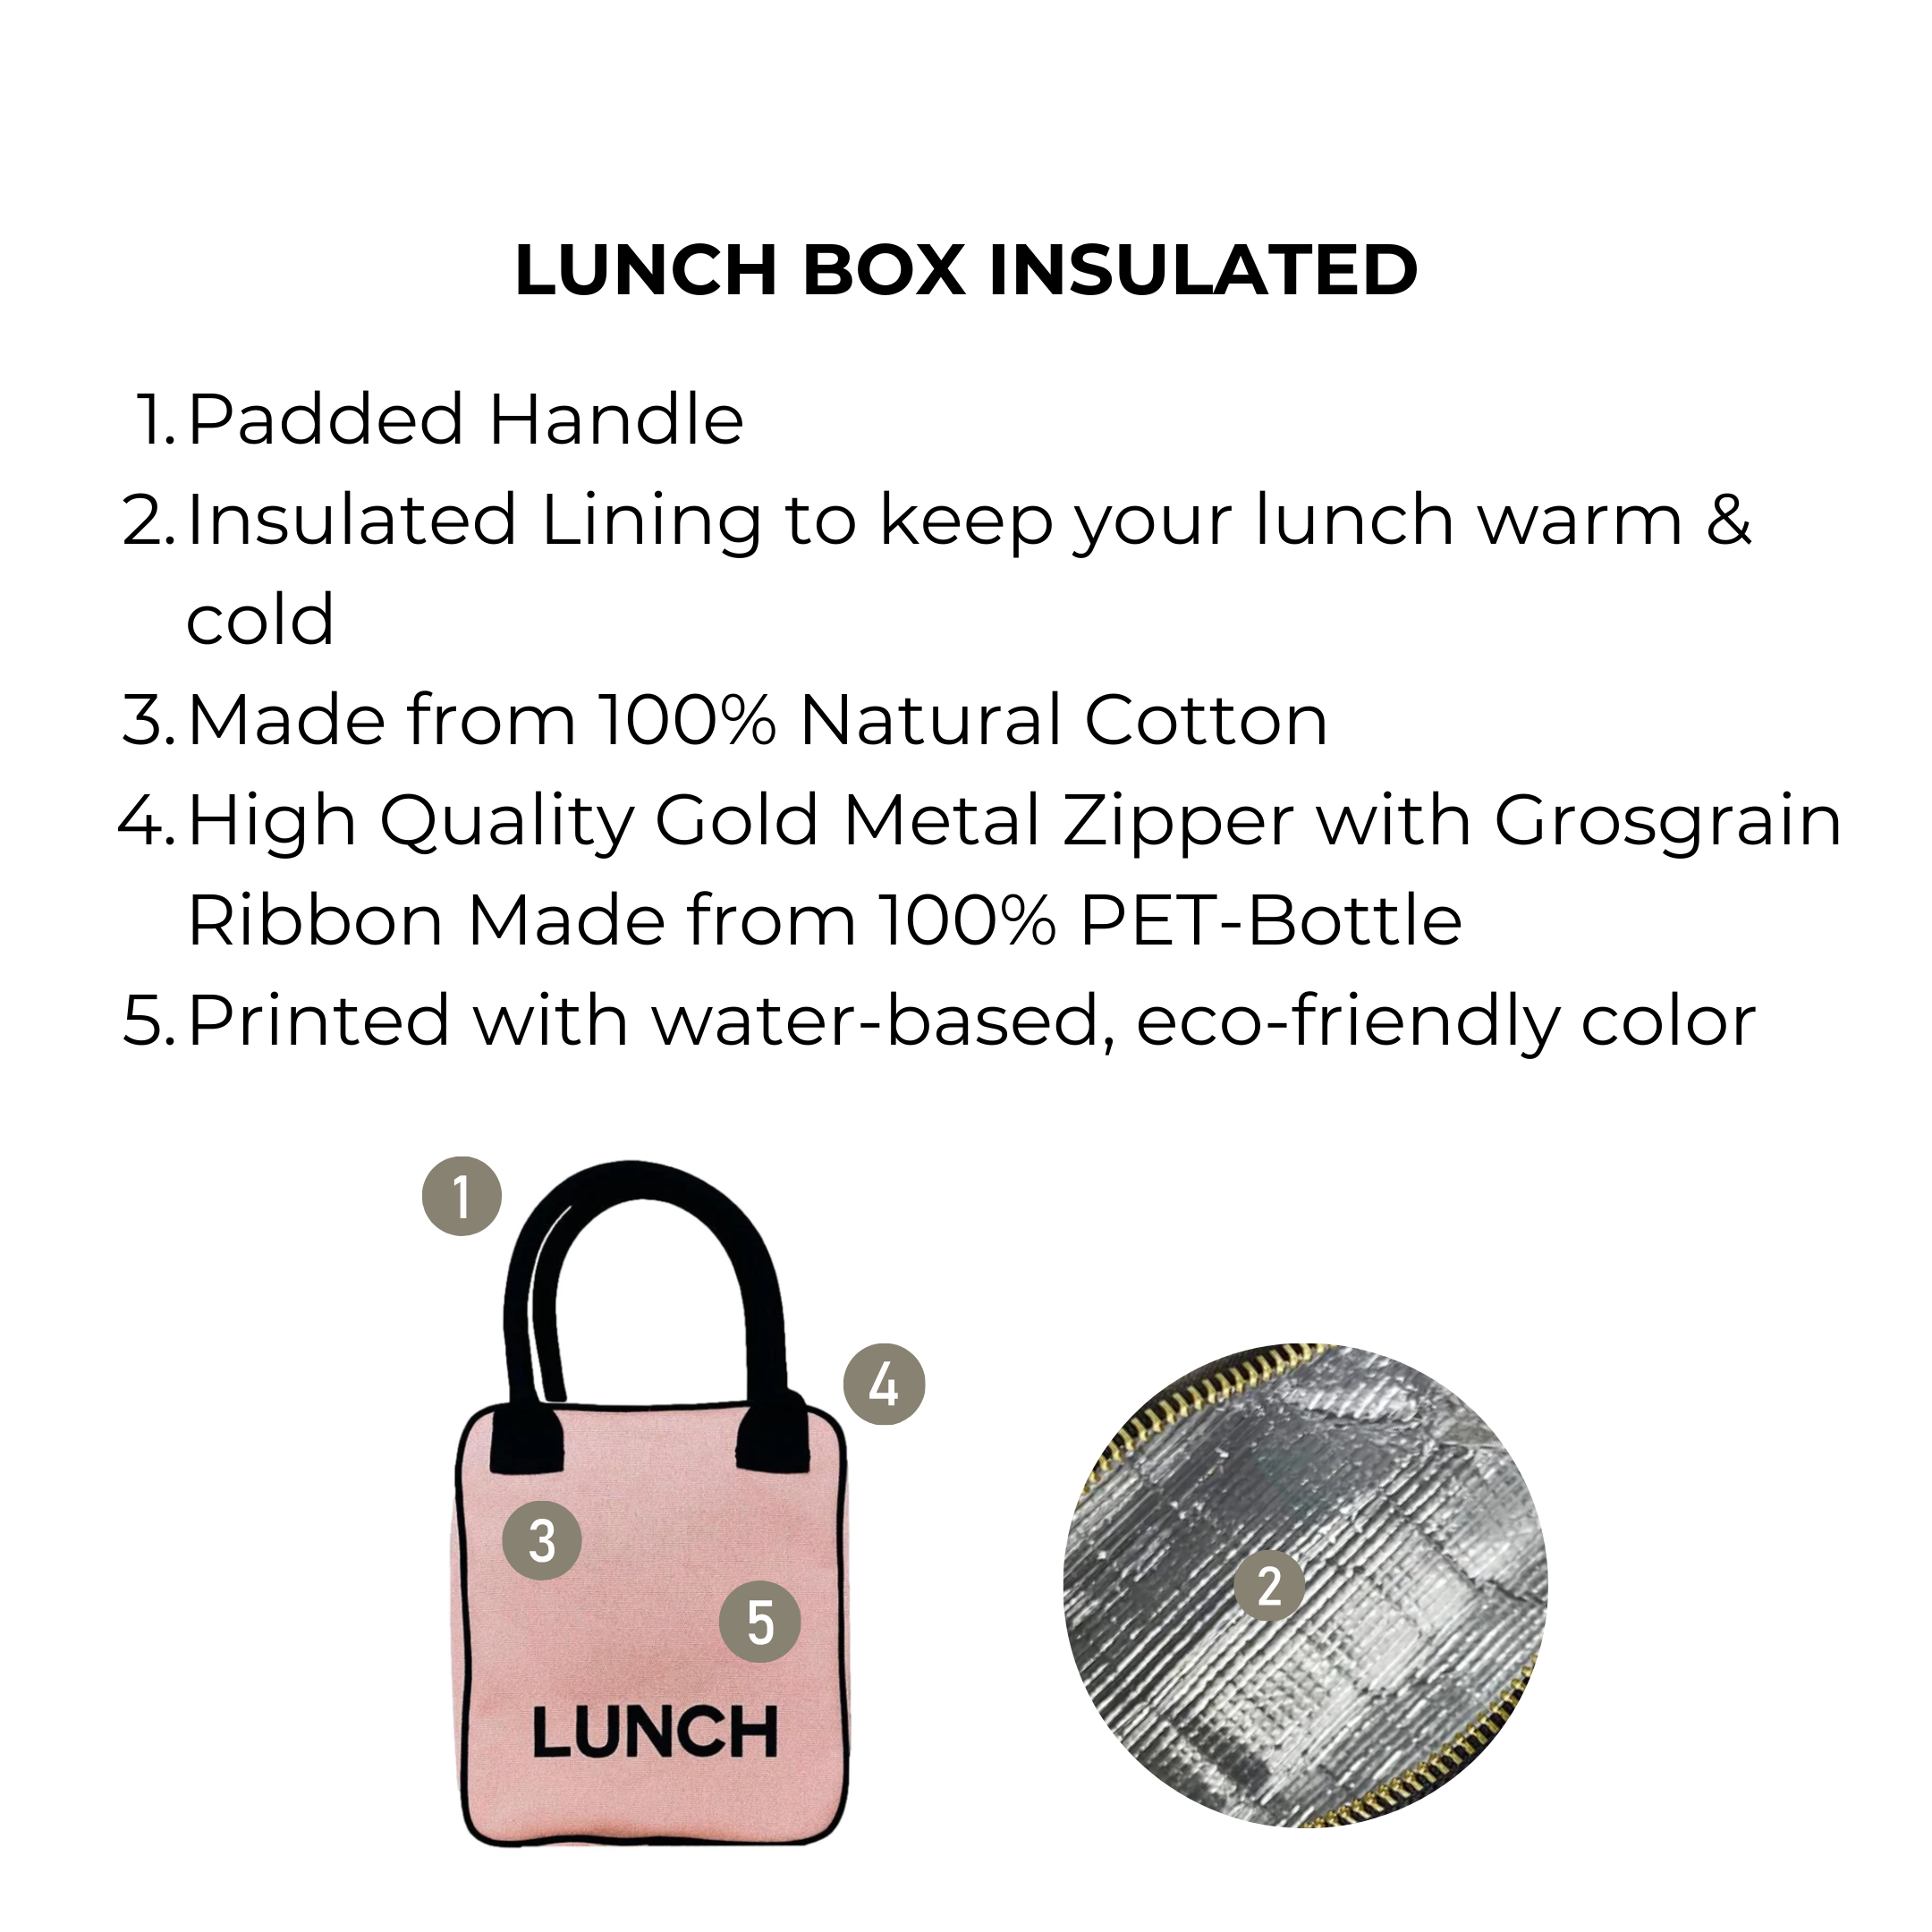 Lunch Box Insulated, Pink/Blush | Bag-all